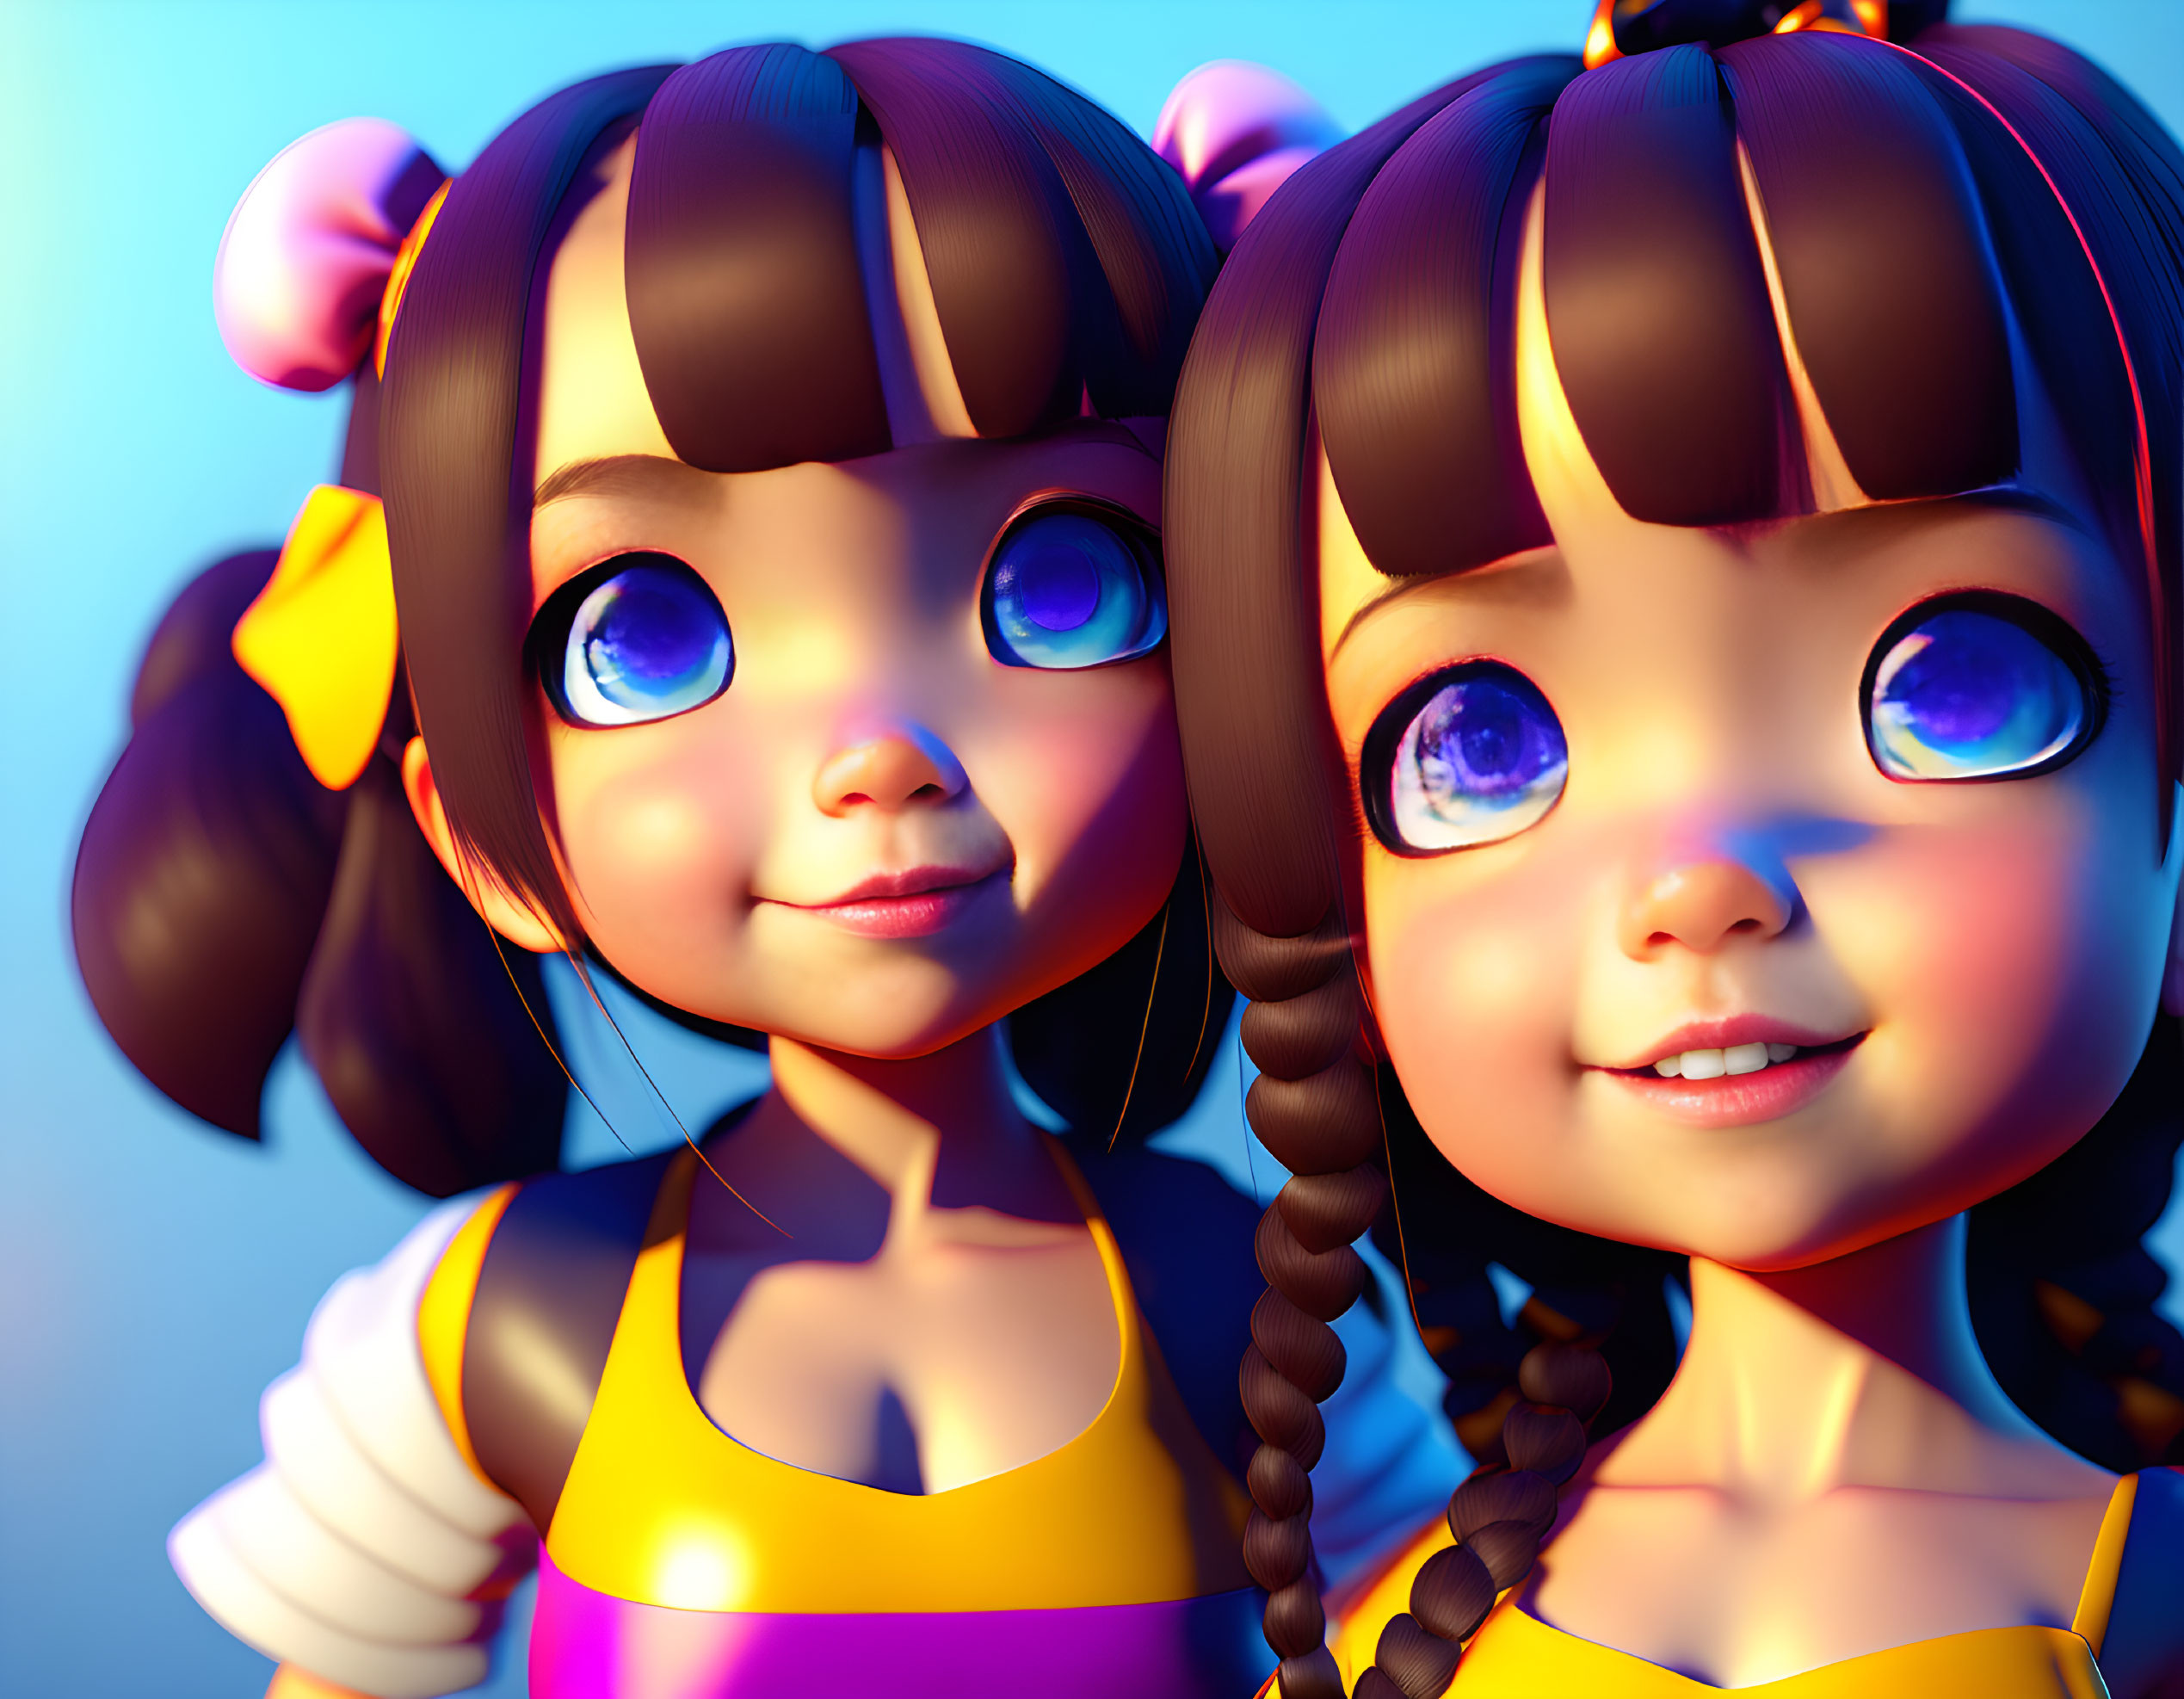 Two girls with large eyes and pigtail hairstyles smiling under soft lighting